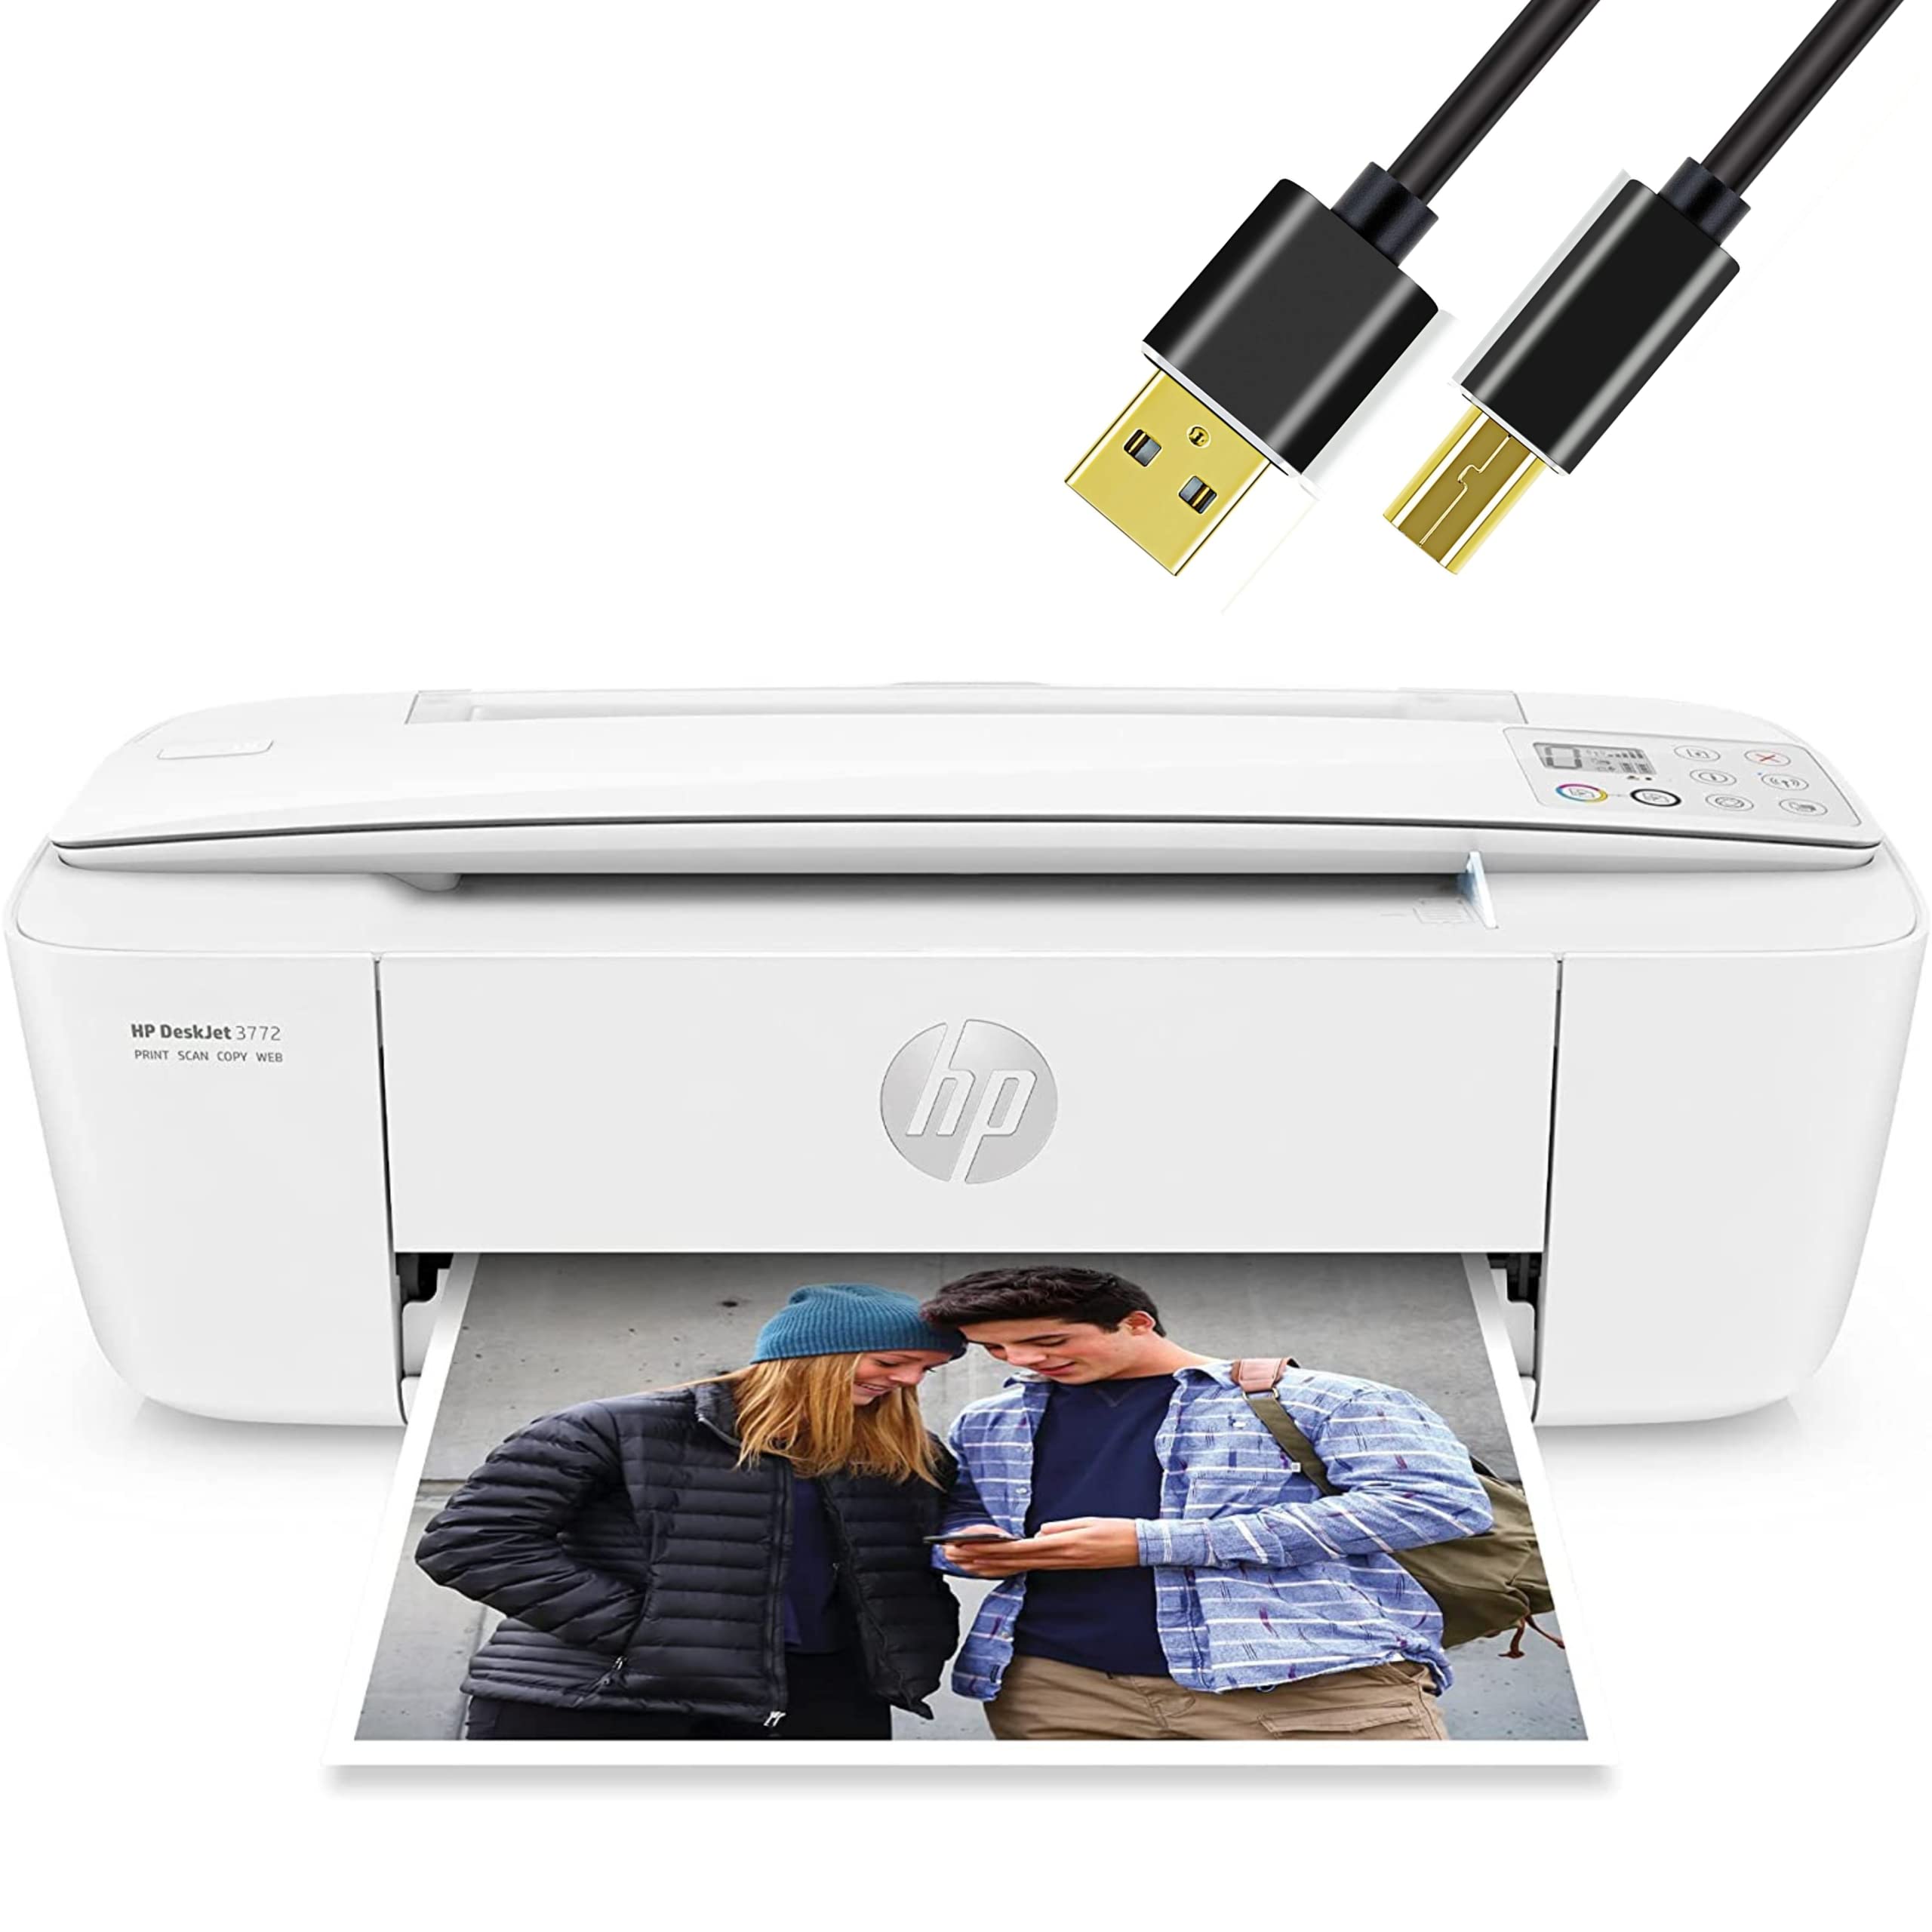 HP H -P DeskJet Wireless Color Inkjet Printer All-in-One with LCD Display - Print Scan Copy and Mobile Printing Ultra Compact with 6 ft  Printer Cable